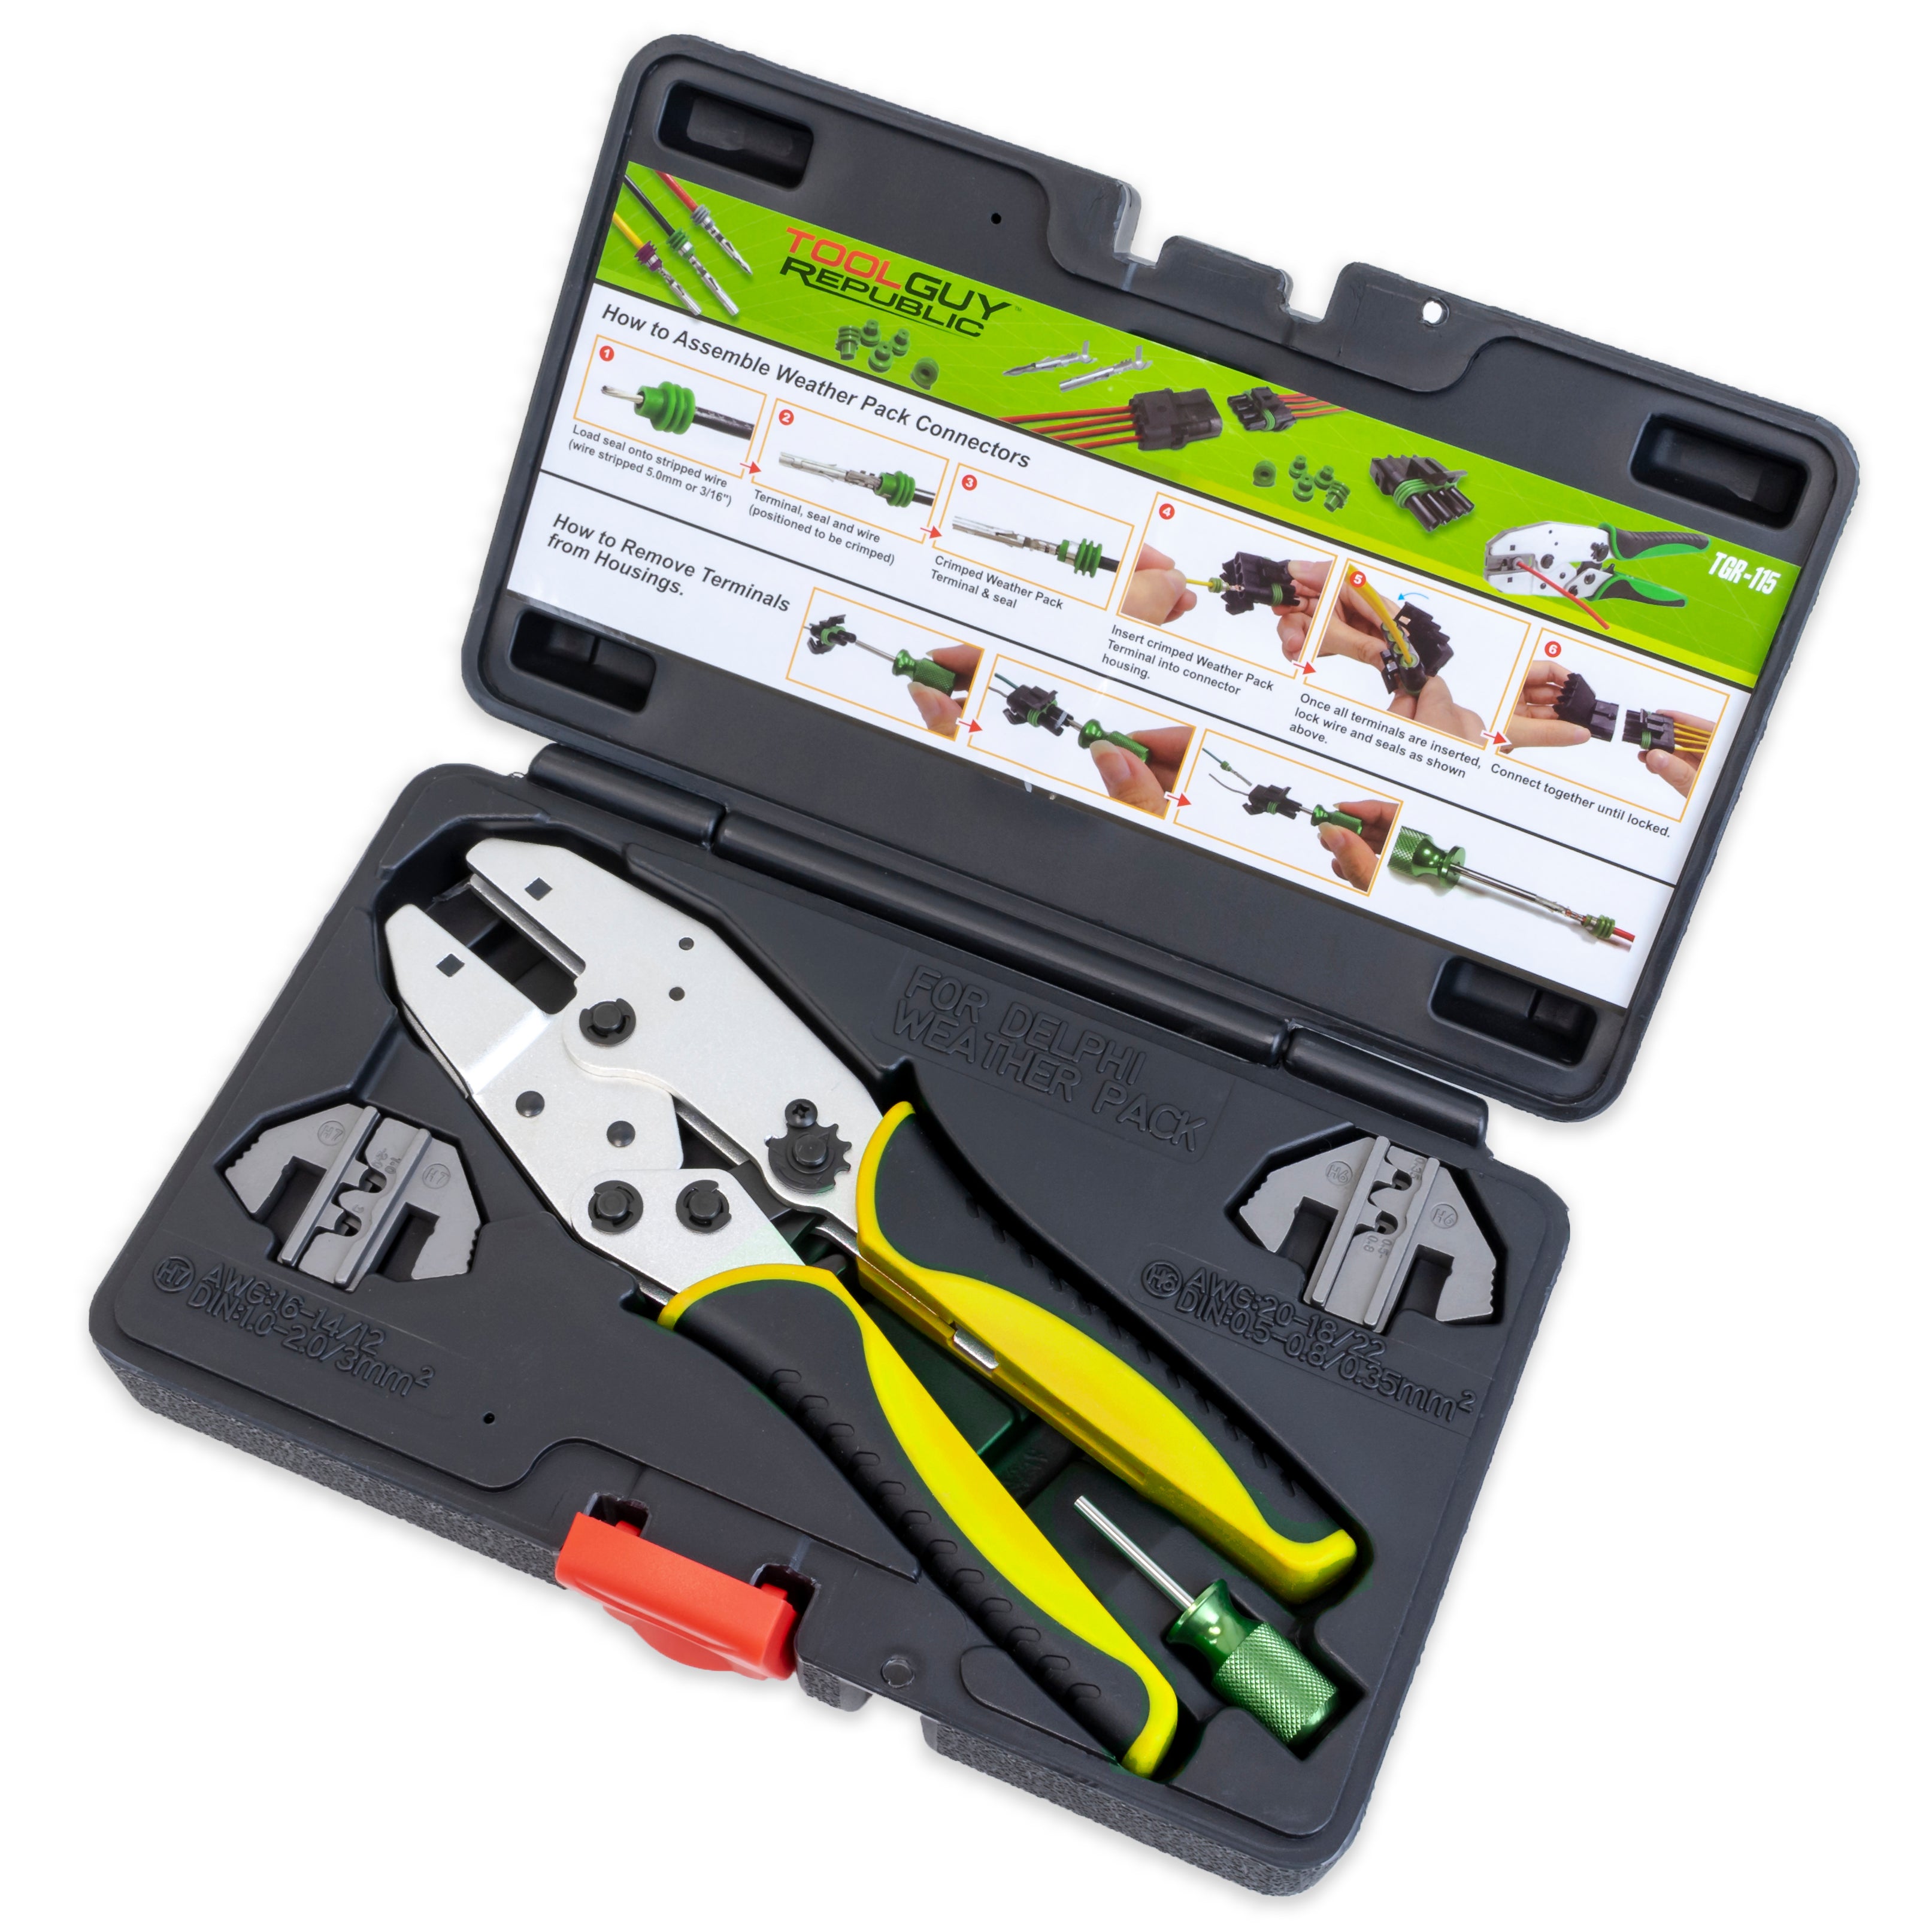 Delphi Weather Pack Connector Terminal Ratcheting Crimping Tool- Includes 2 Dies - Tool Guy Republic